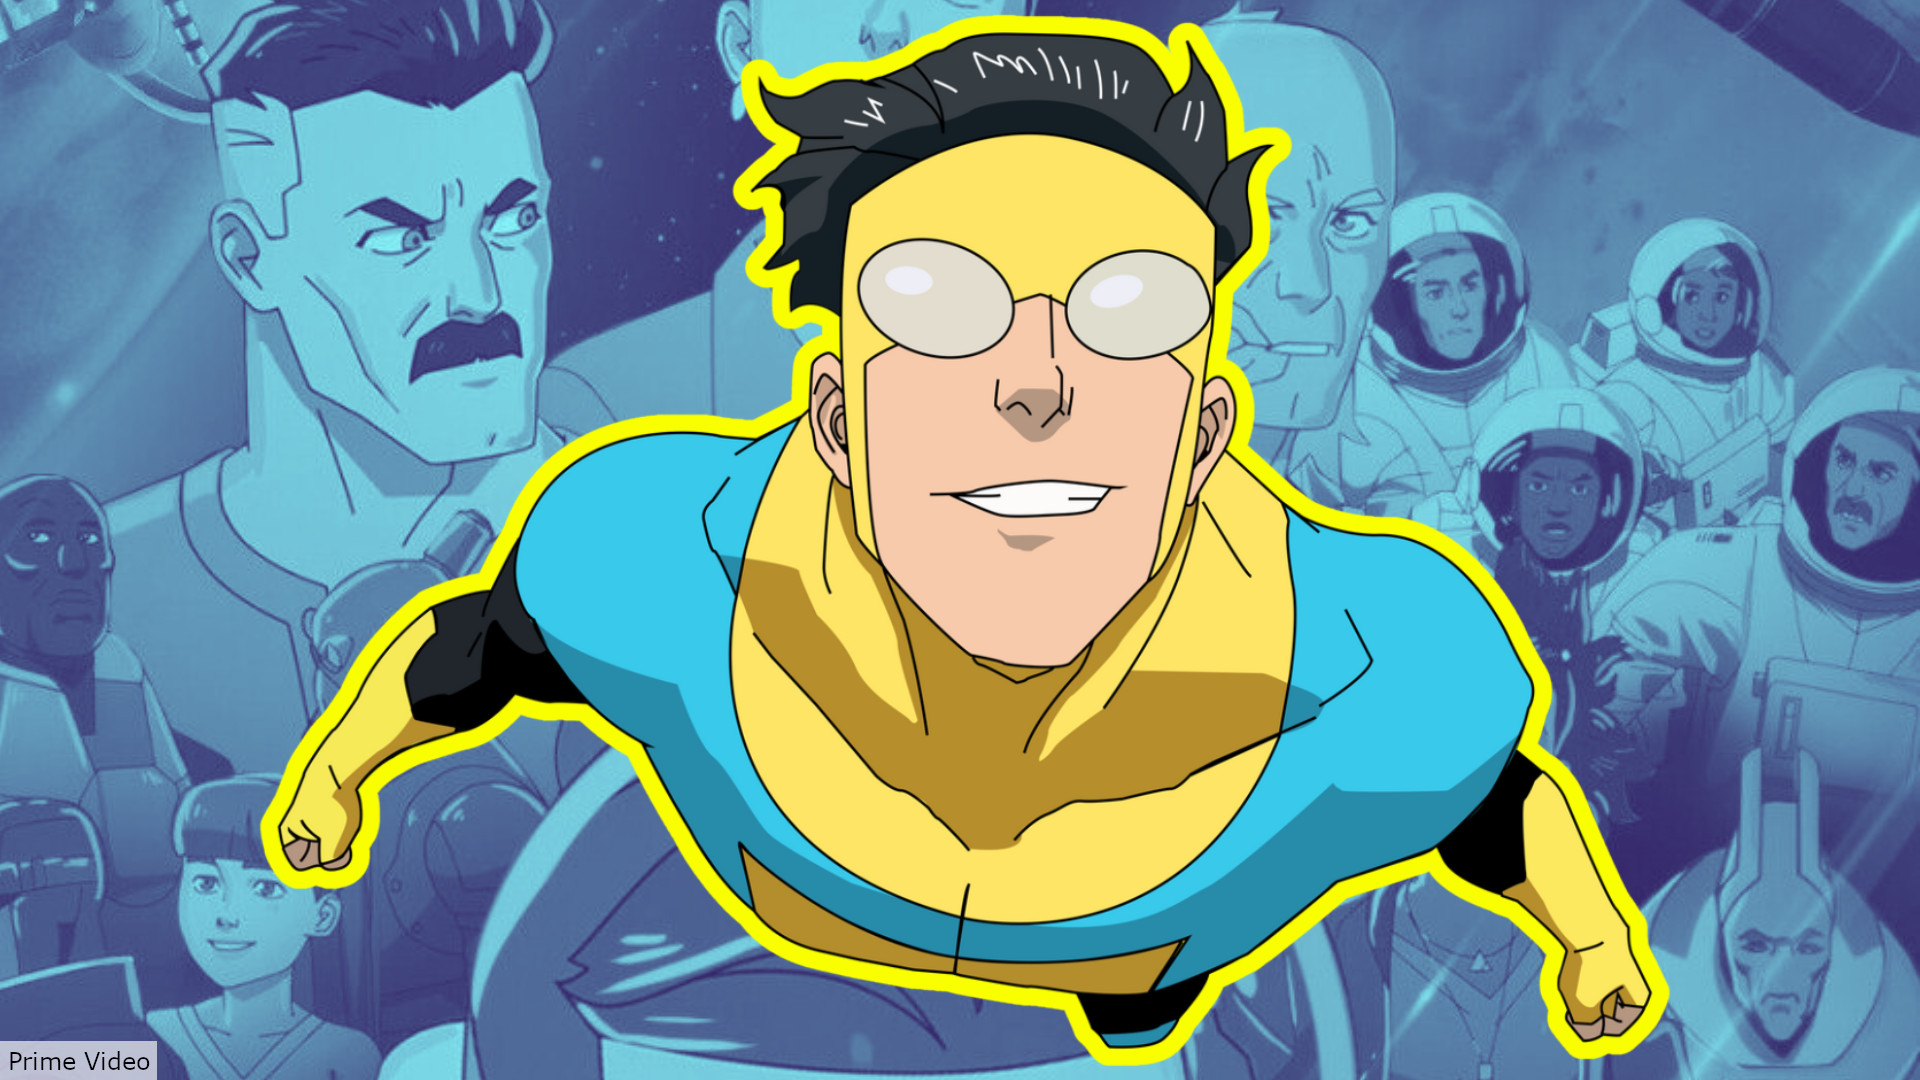 Invincible Season 2 Episode 4 Release Date : Recap, Cast, Review, Spoilers,  Streaming, Schedule & Where To Watch? - SarkariResult